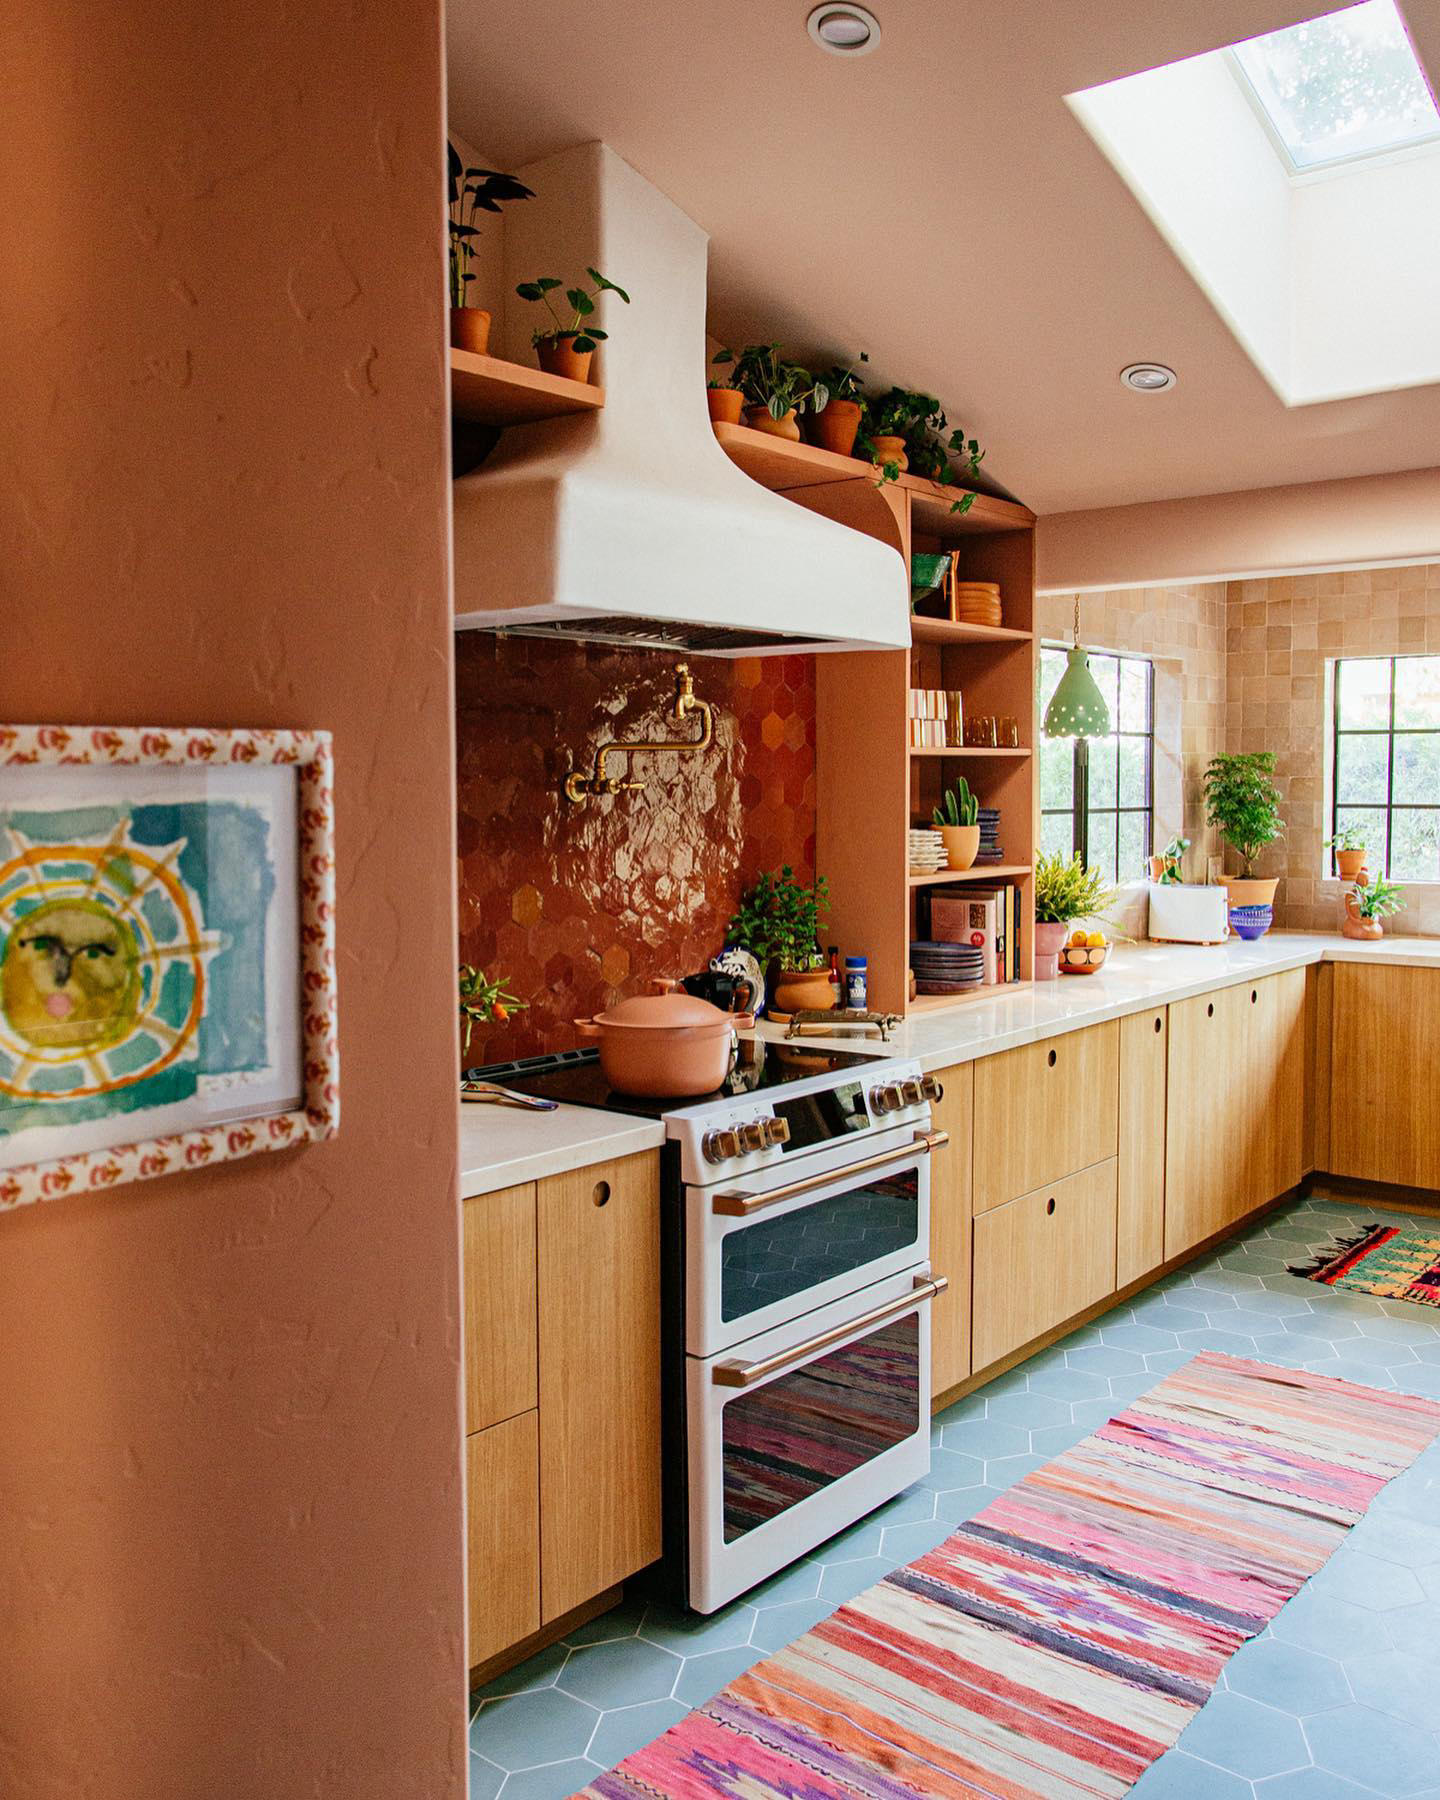 image  1 Justina Blakeney - #ad I wanted our #jungalowbythemountain kitchen to harness a ton of natural light